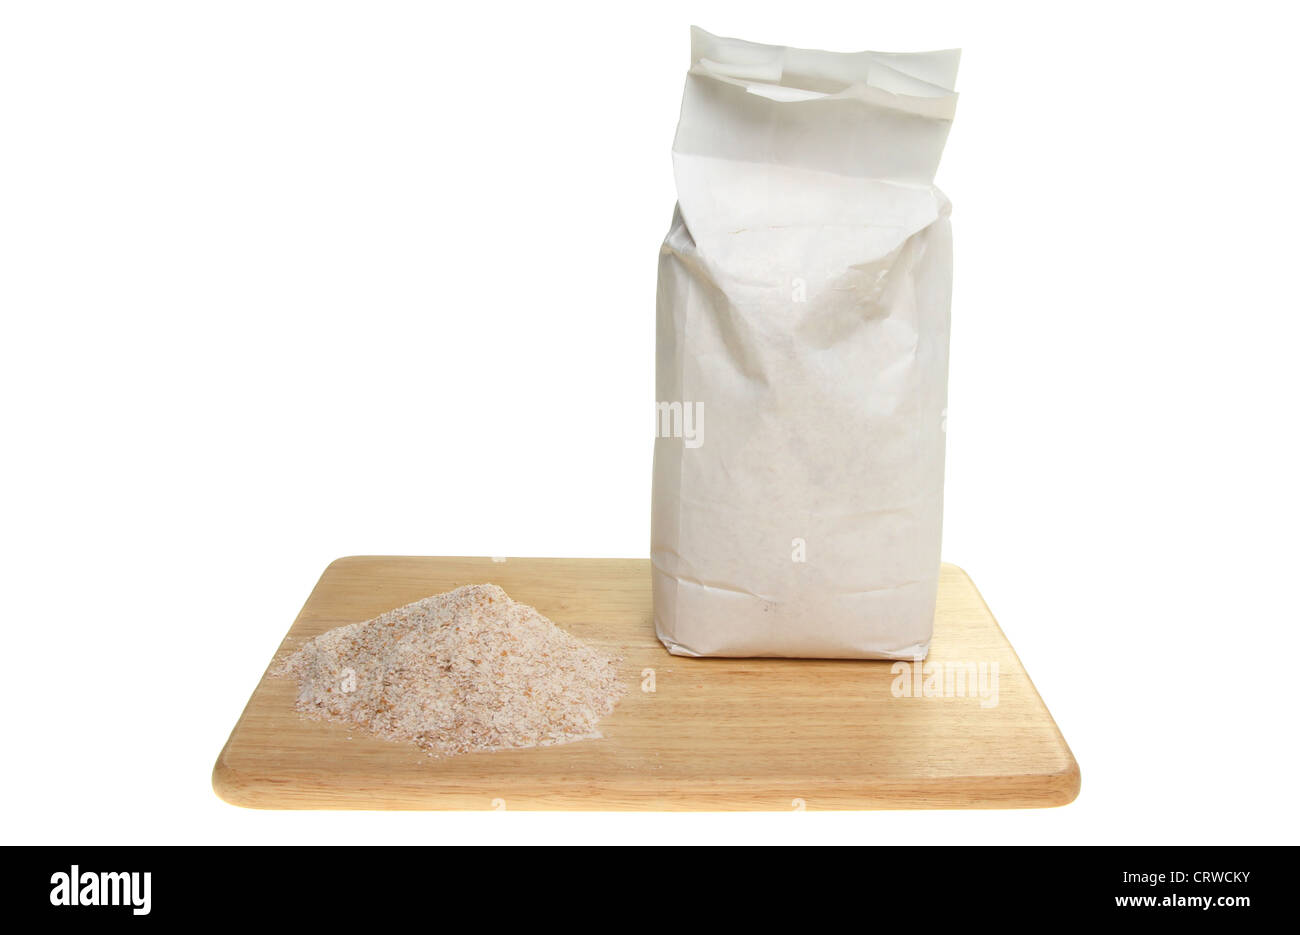 Bag and pile of wholegrain flour on a board isolated against white Stock Photo